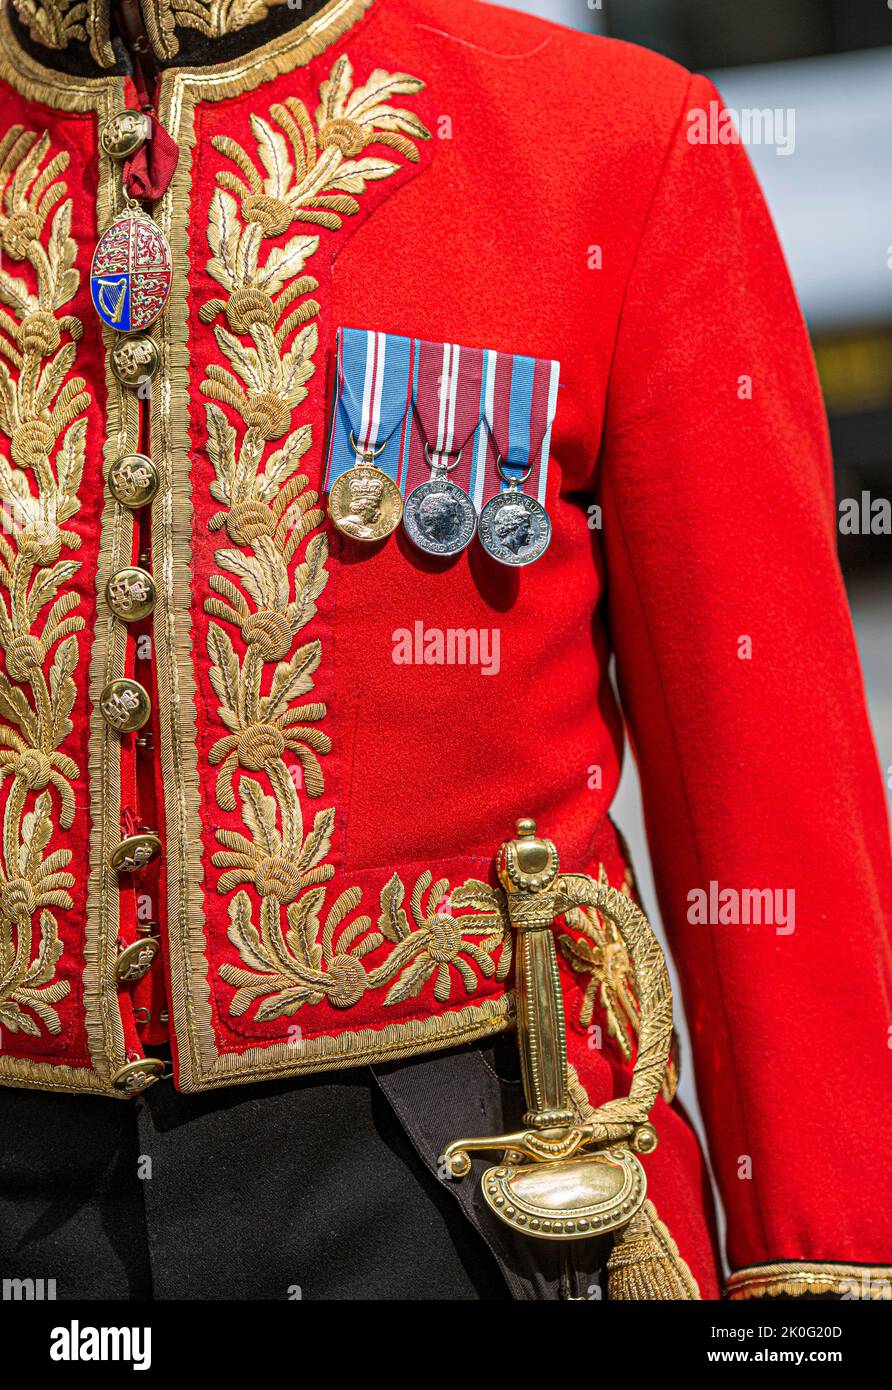 A scarlet tunic or red coat a  military garment worn by an officer in the United Kingdome. Stock Photo